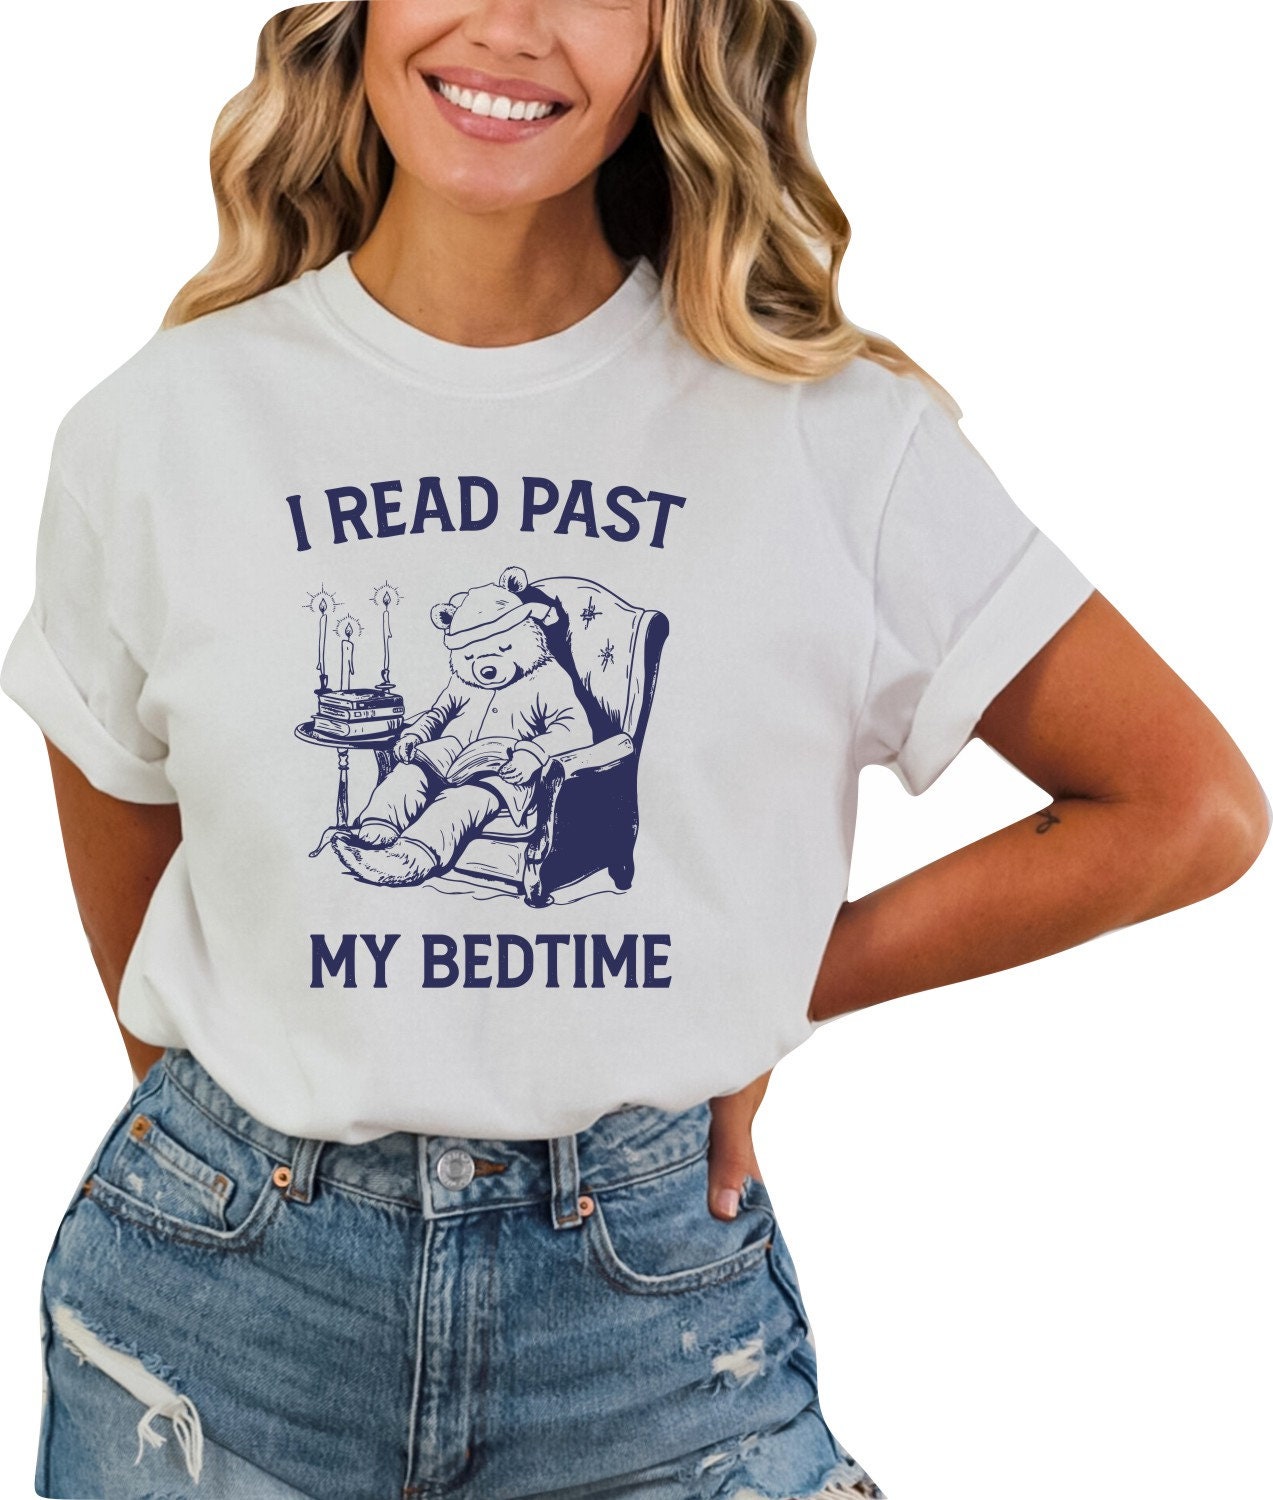 I Read Past My Bedtime Shirt Book Lover Shirt Book T-Shirt women Reading Shirts Book Club Shirt Comfort Colors